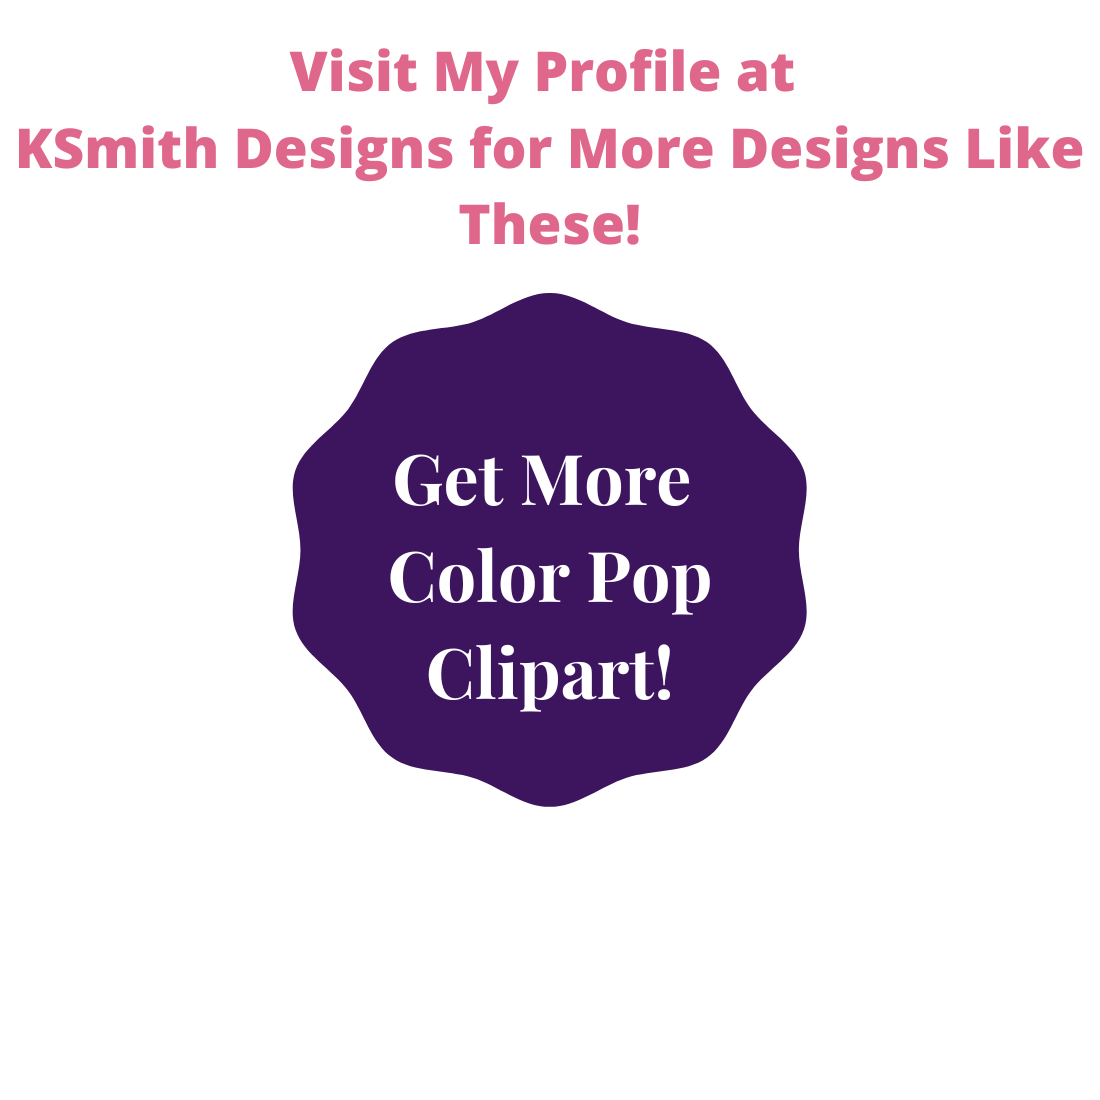 15 COLOR POP CLIPART IMAGES OF COFFEE CUPS preview image.